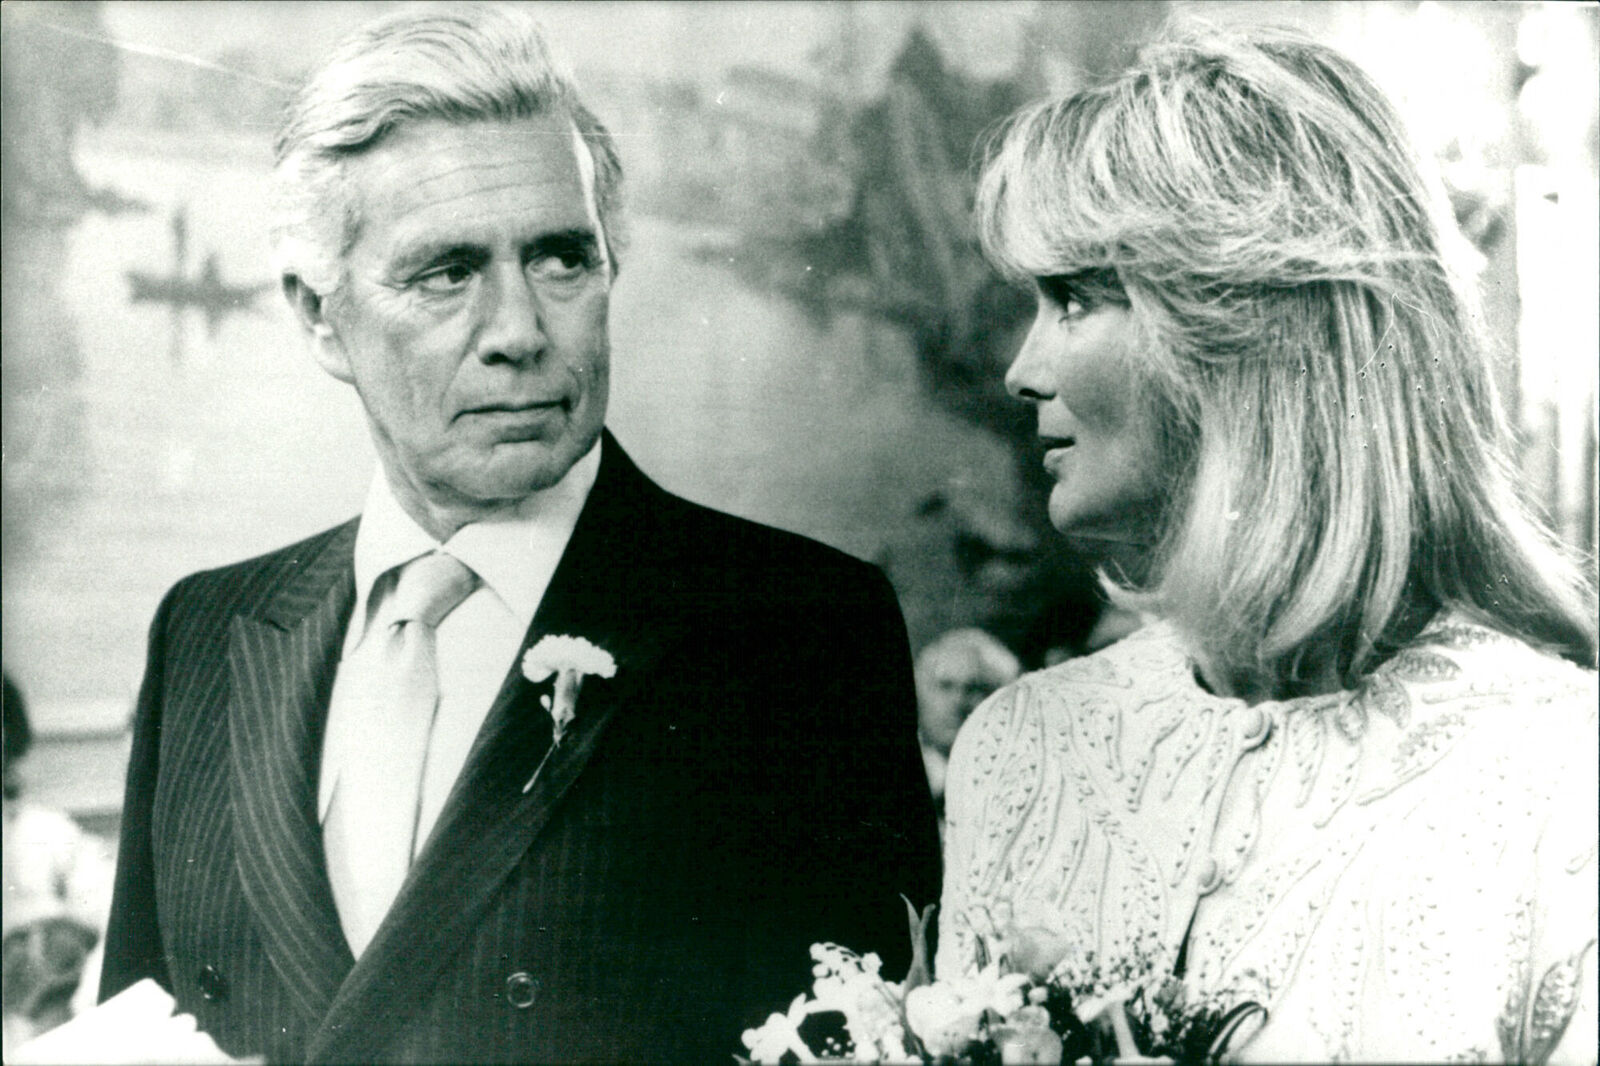 John Forsythe and Linda Evans in the first seas... - Vintage Photograph 2870733